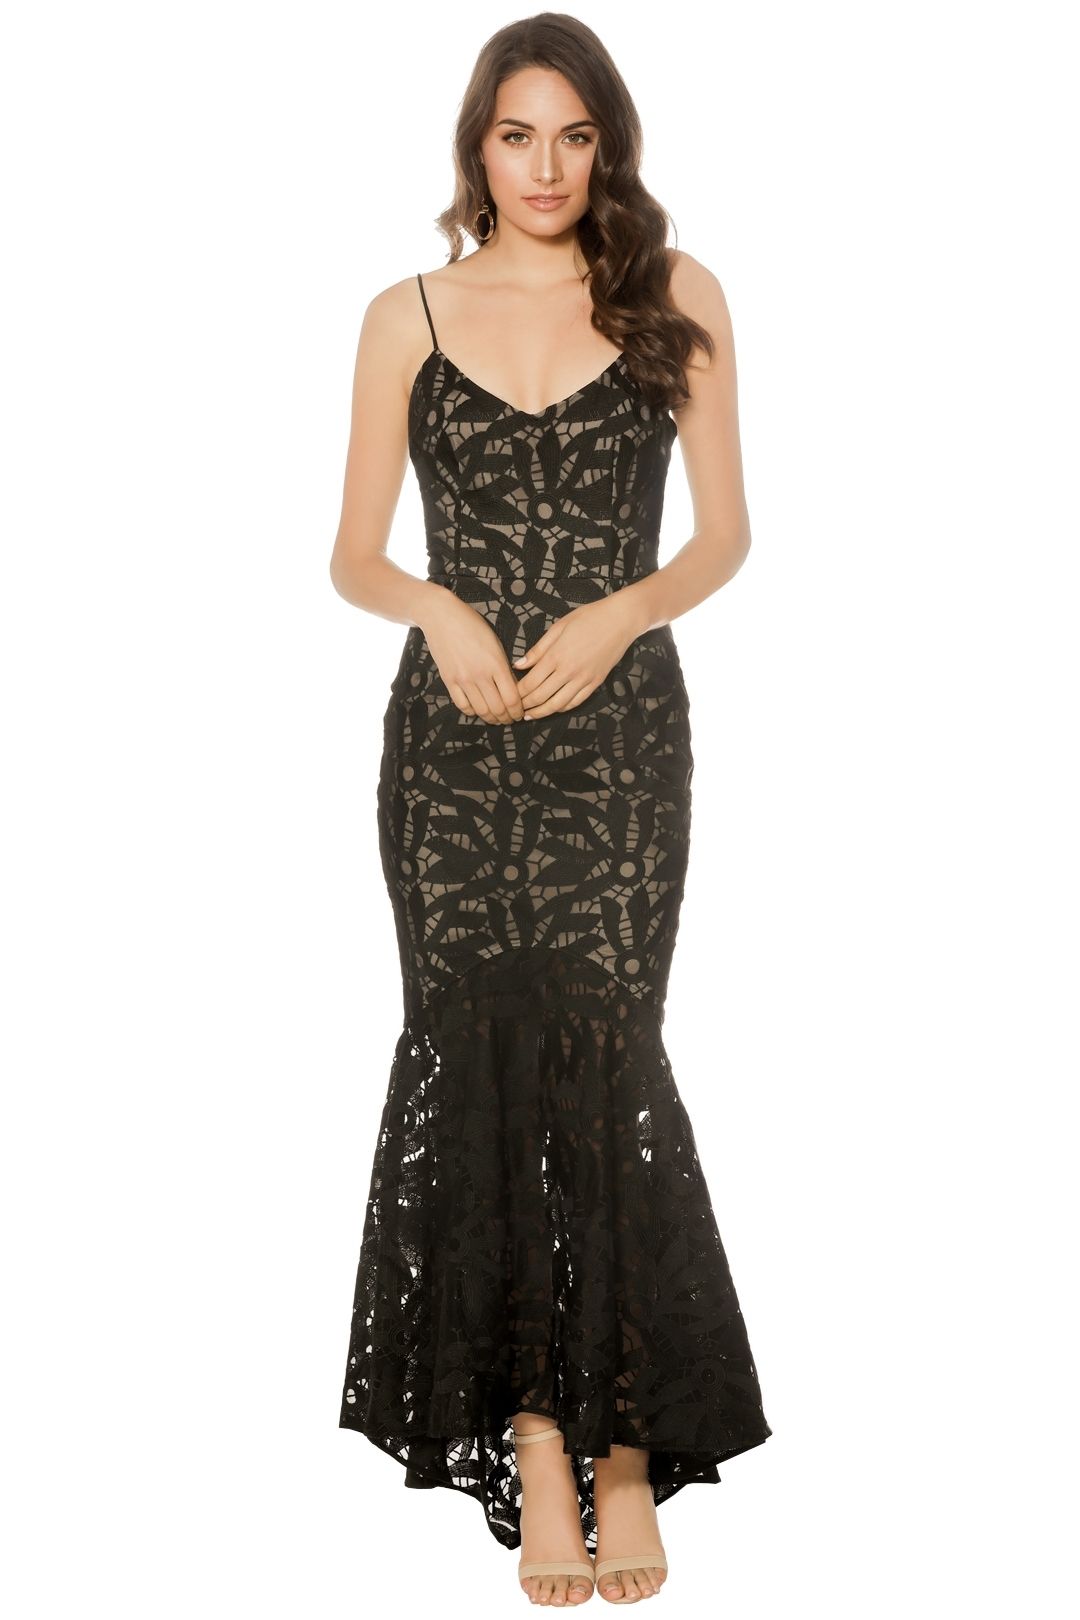 Cooper St - Lady of Venice Gown - Black - Front